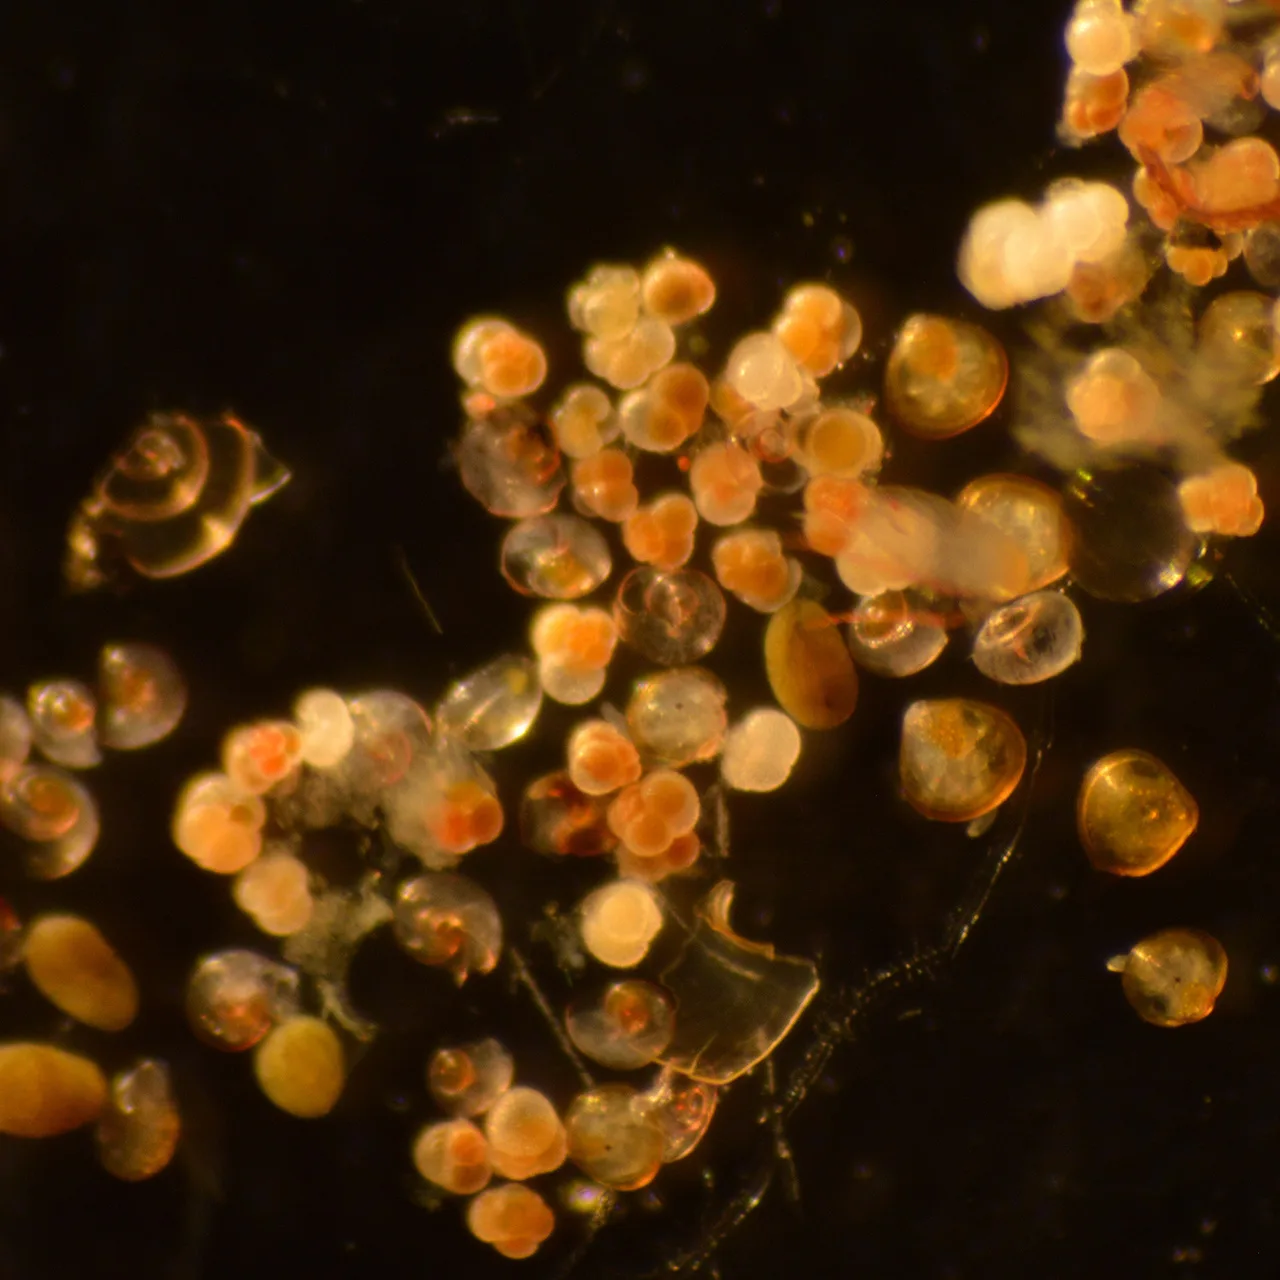 The colder water assemblage of foraminifera. T. quinqueloba, N. incompta and G. falconensis are common. Credit: NOAA Fisheries